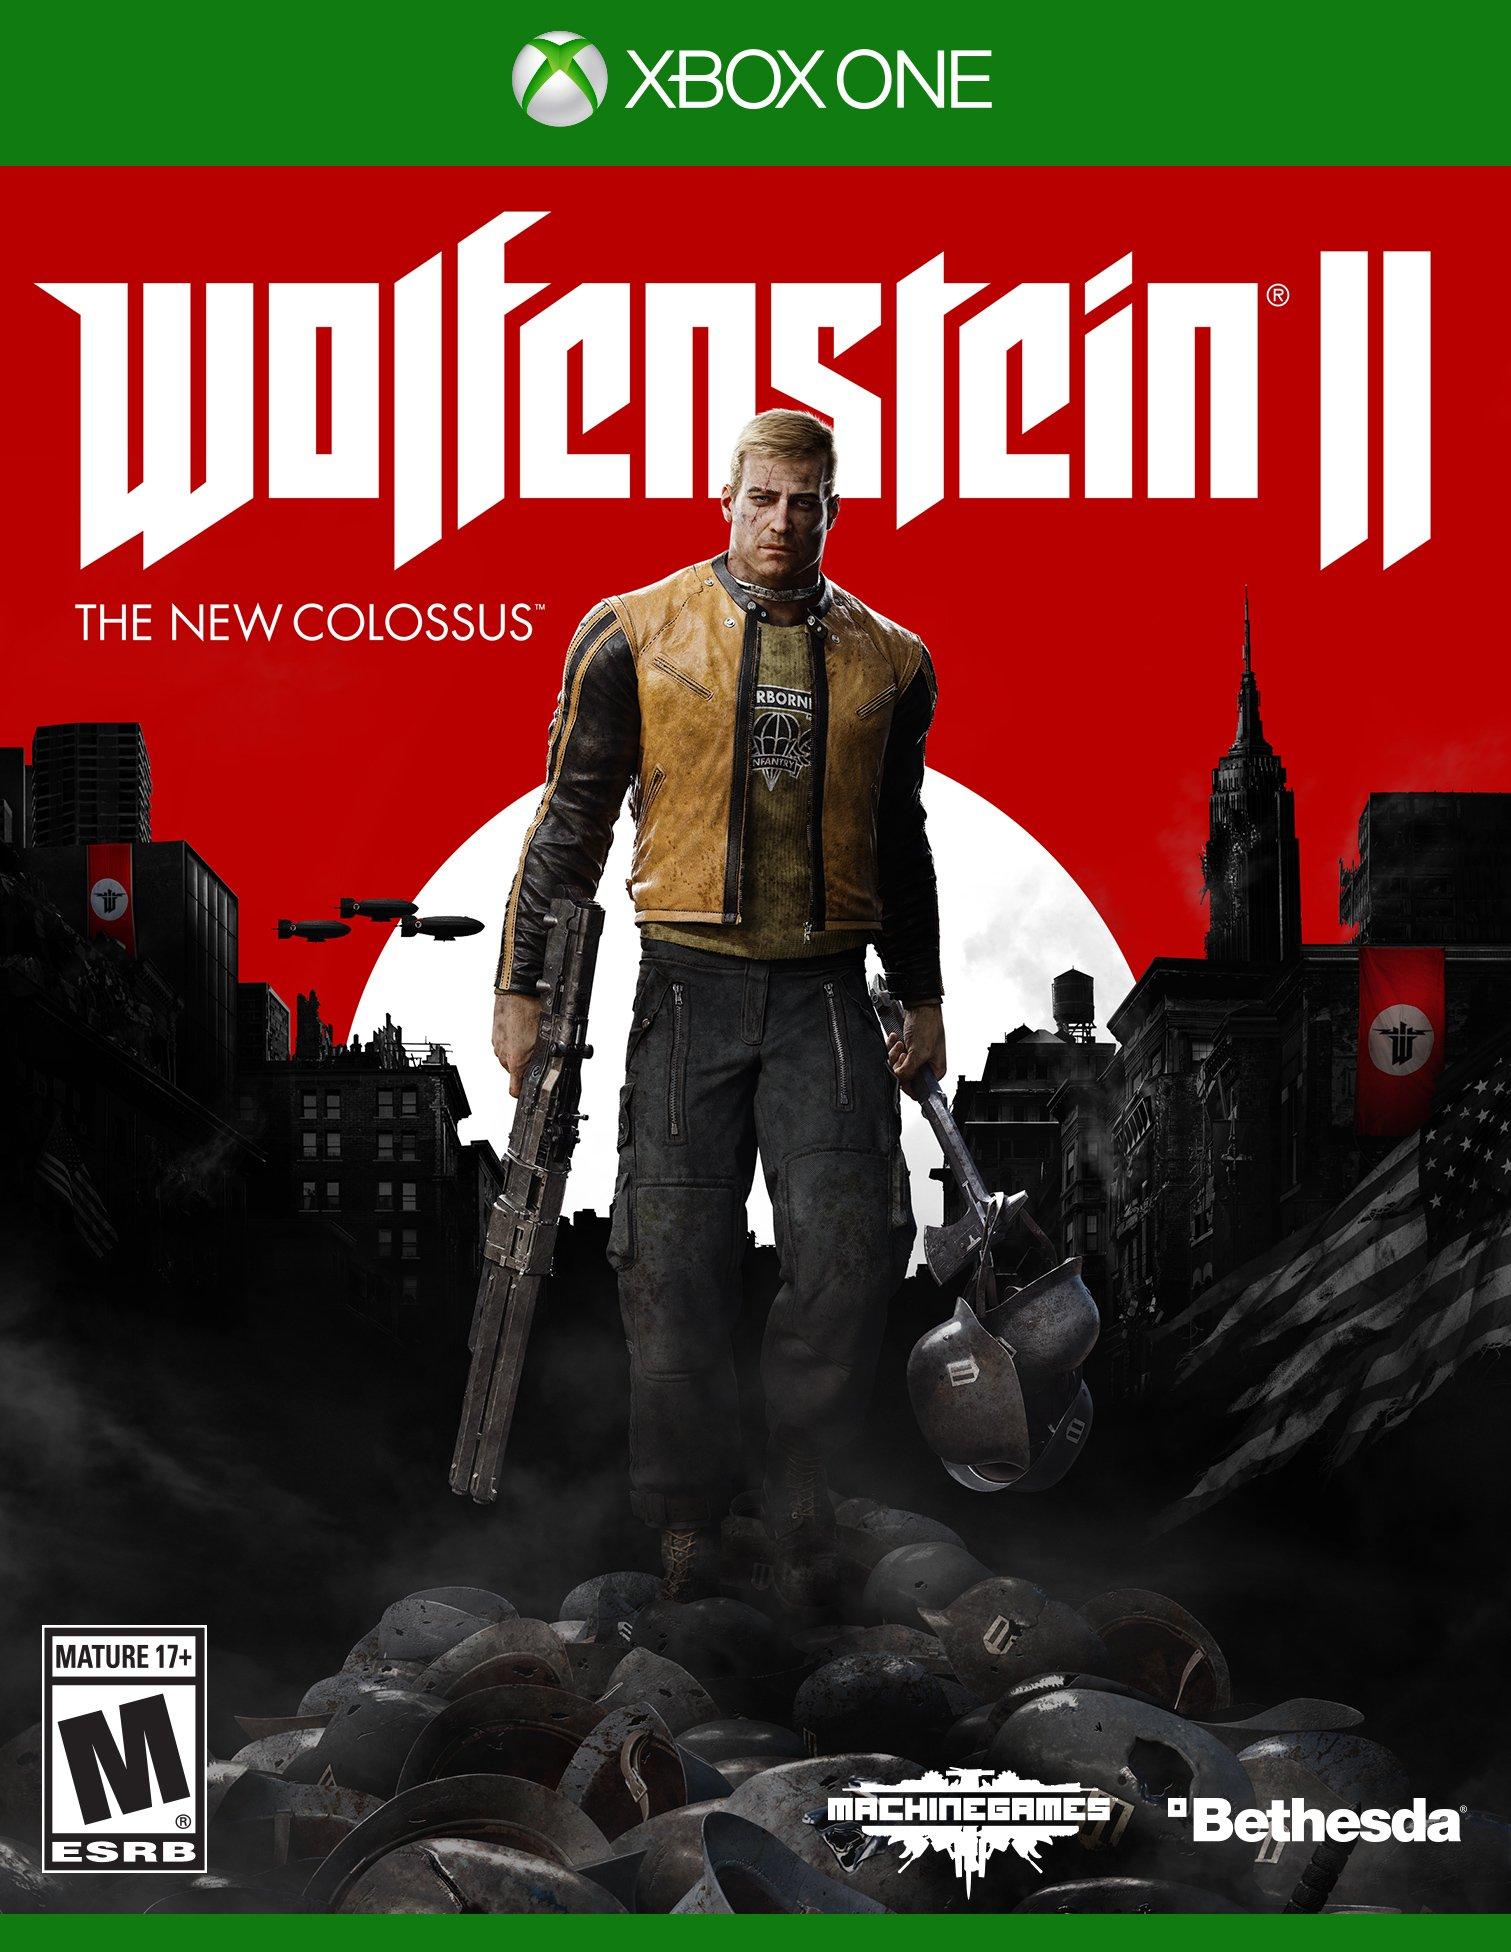 Characters in Wolfenstein - discussion :: Wolfenstein II: The New Colossus  General Discussions